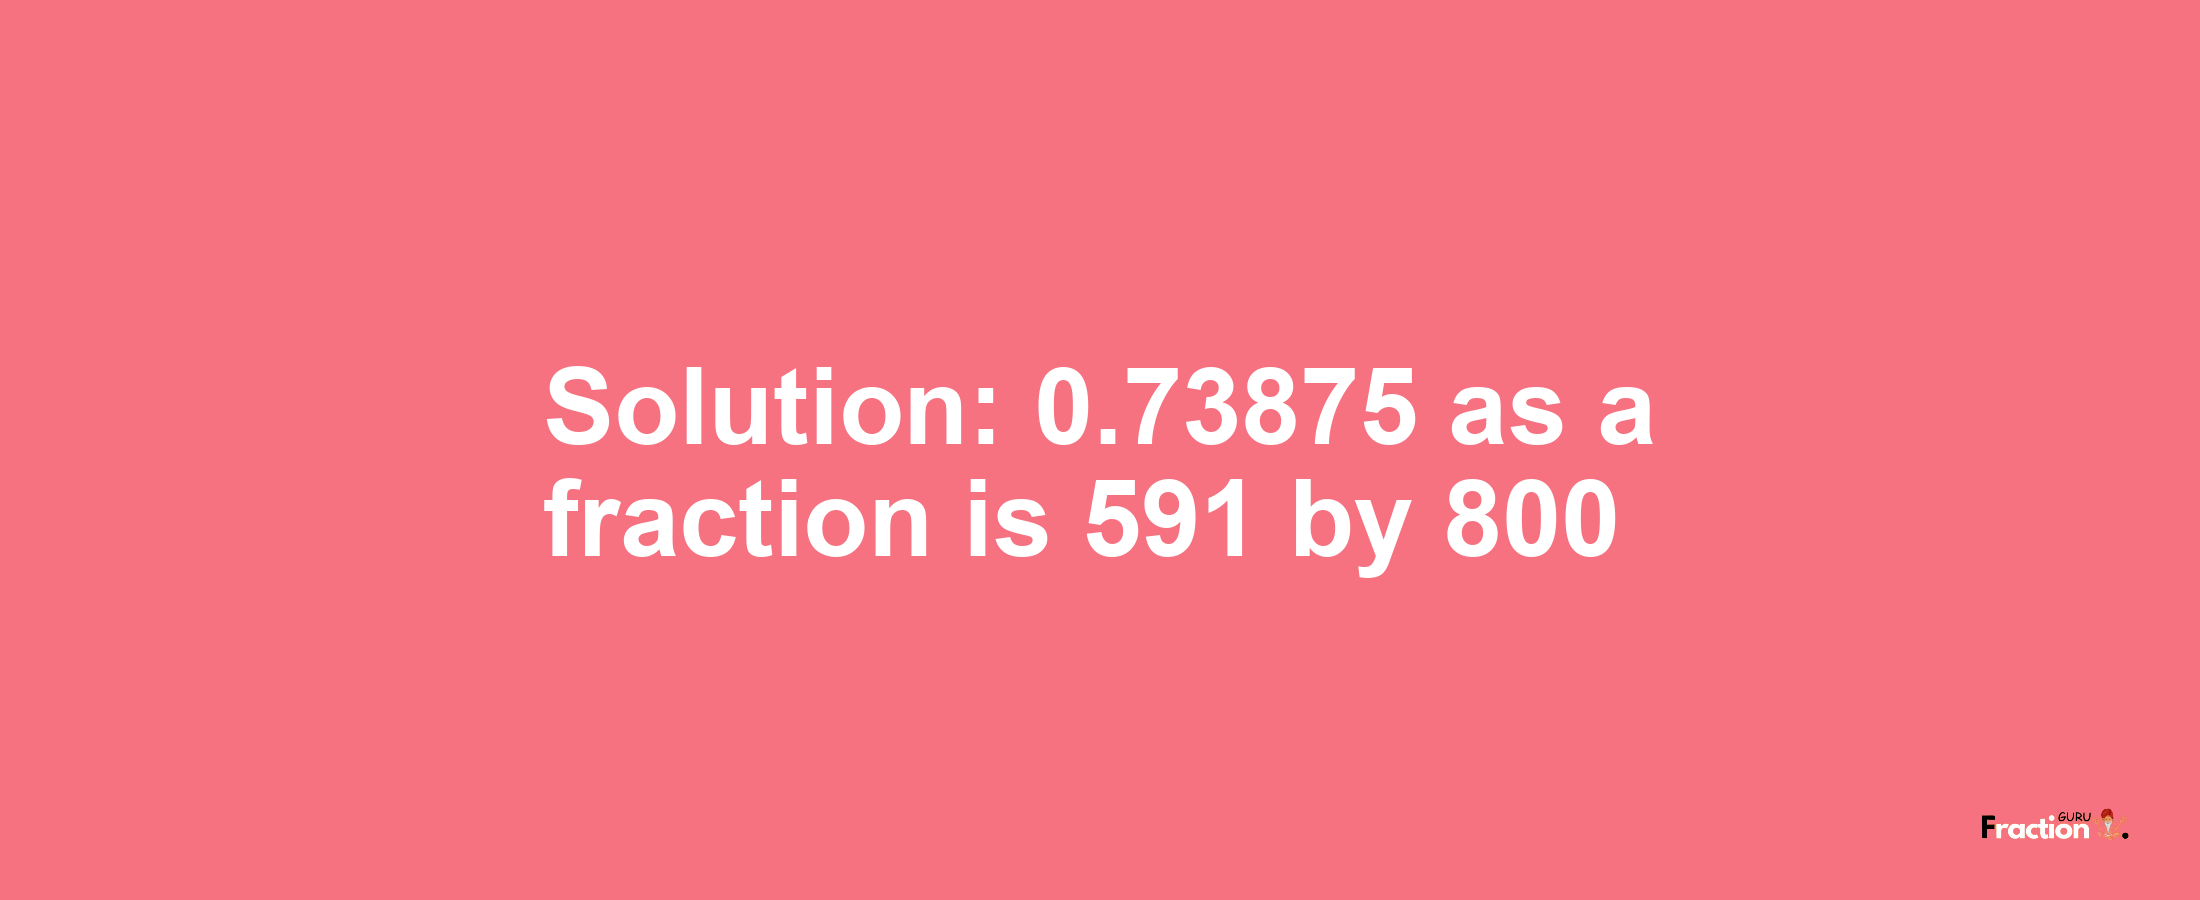 Solution:0.73875 as a fraction is 591/800